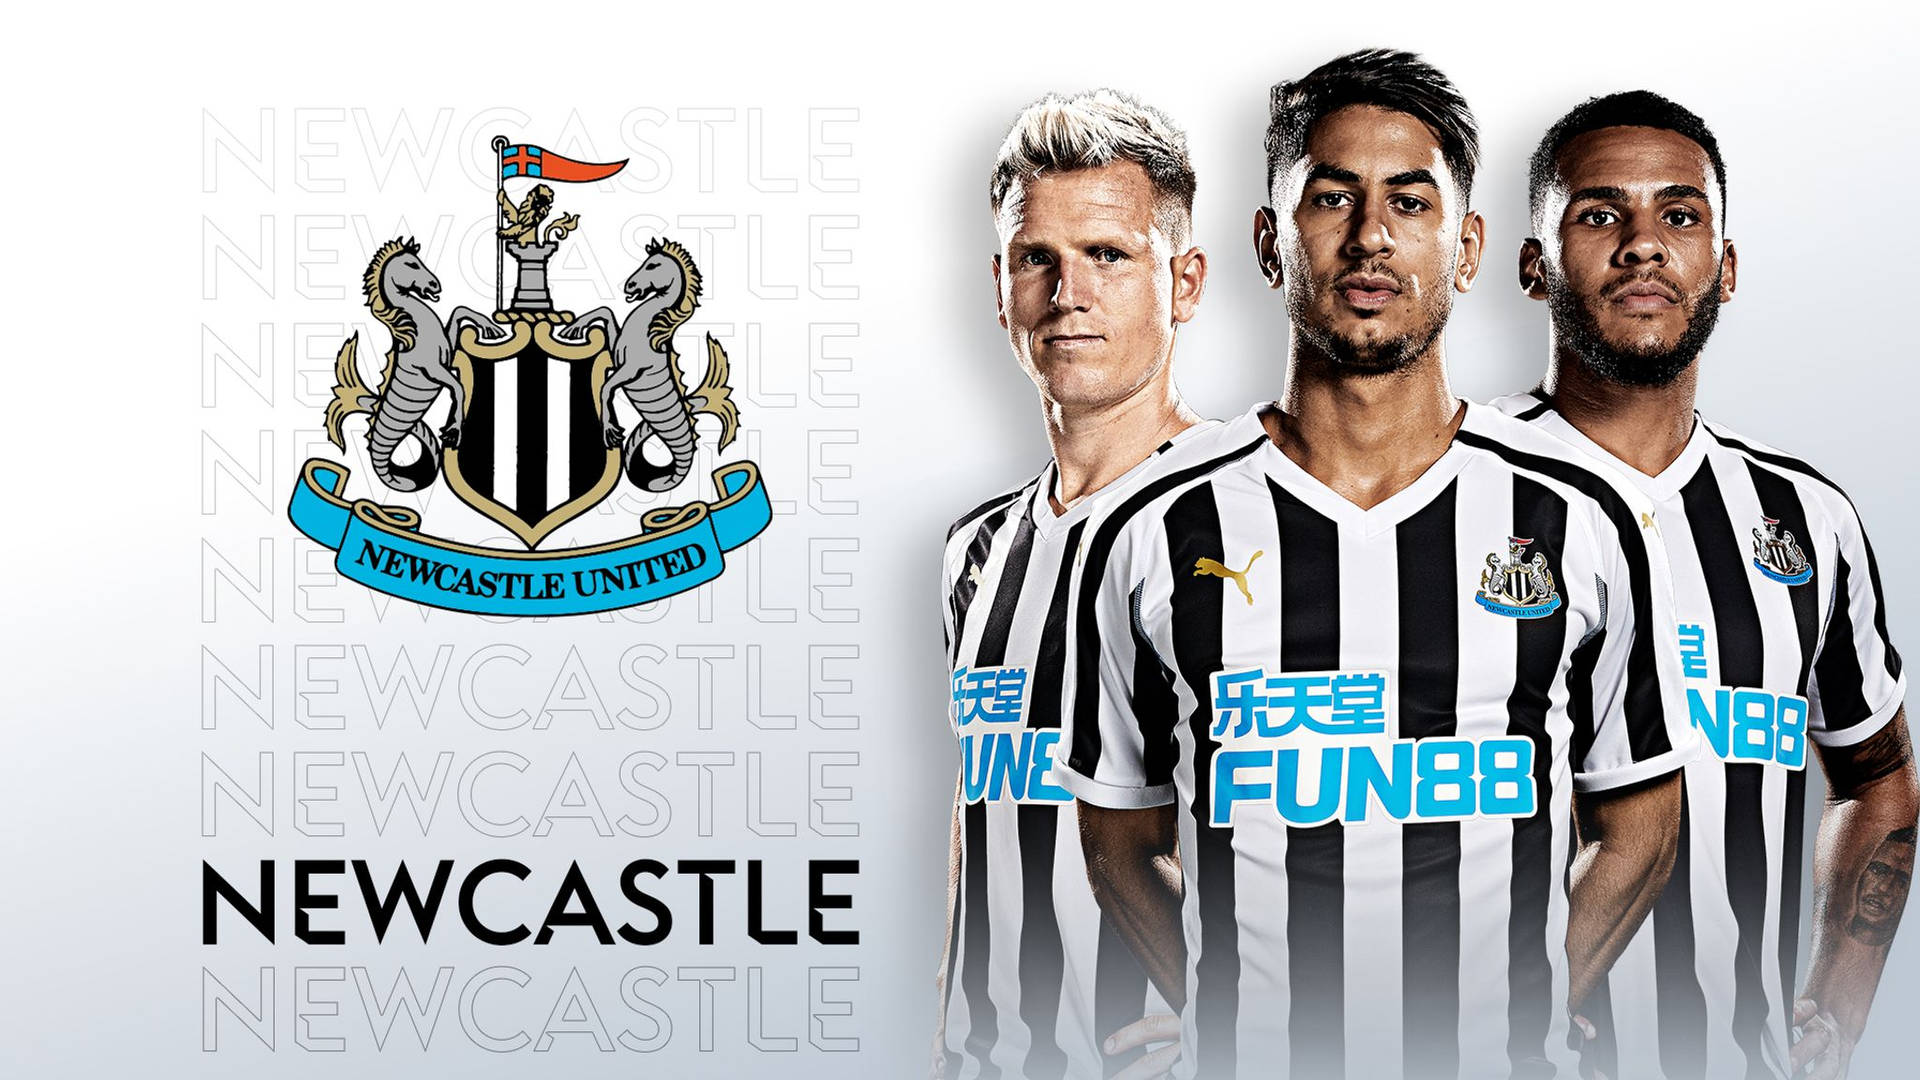 Newcastle United FC Logo And Players Wallpaper